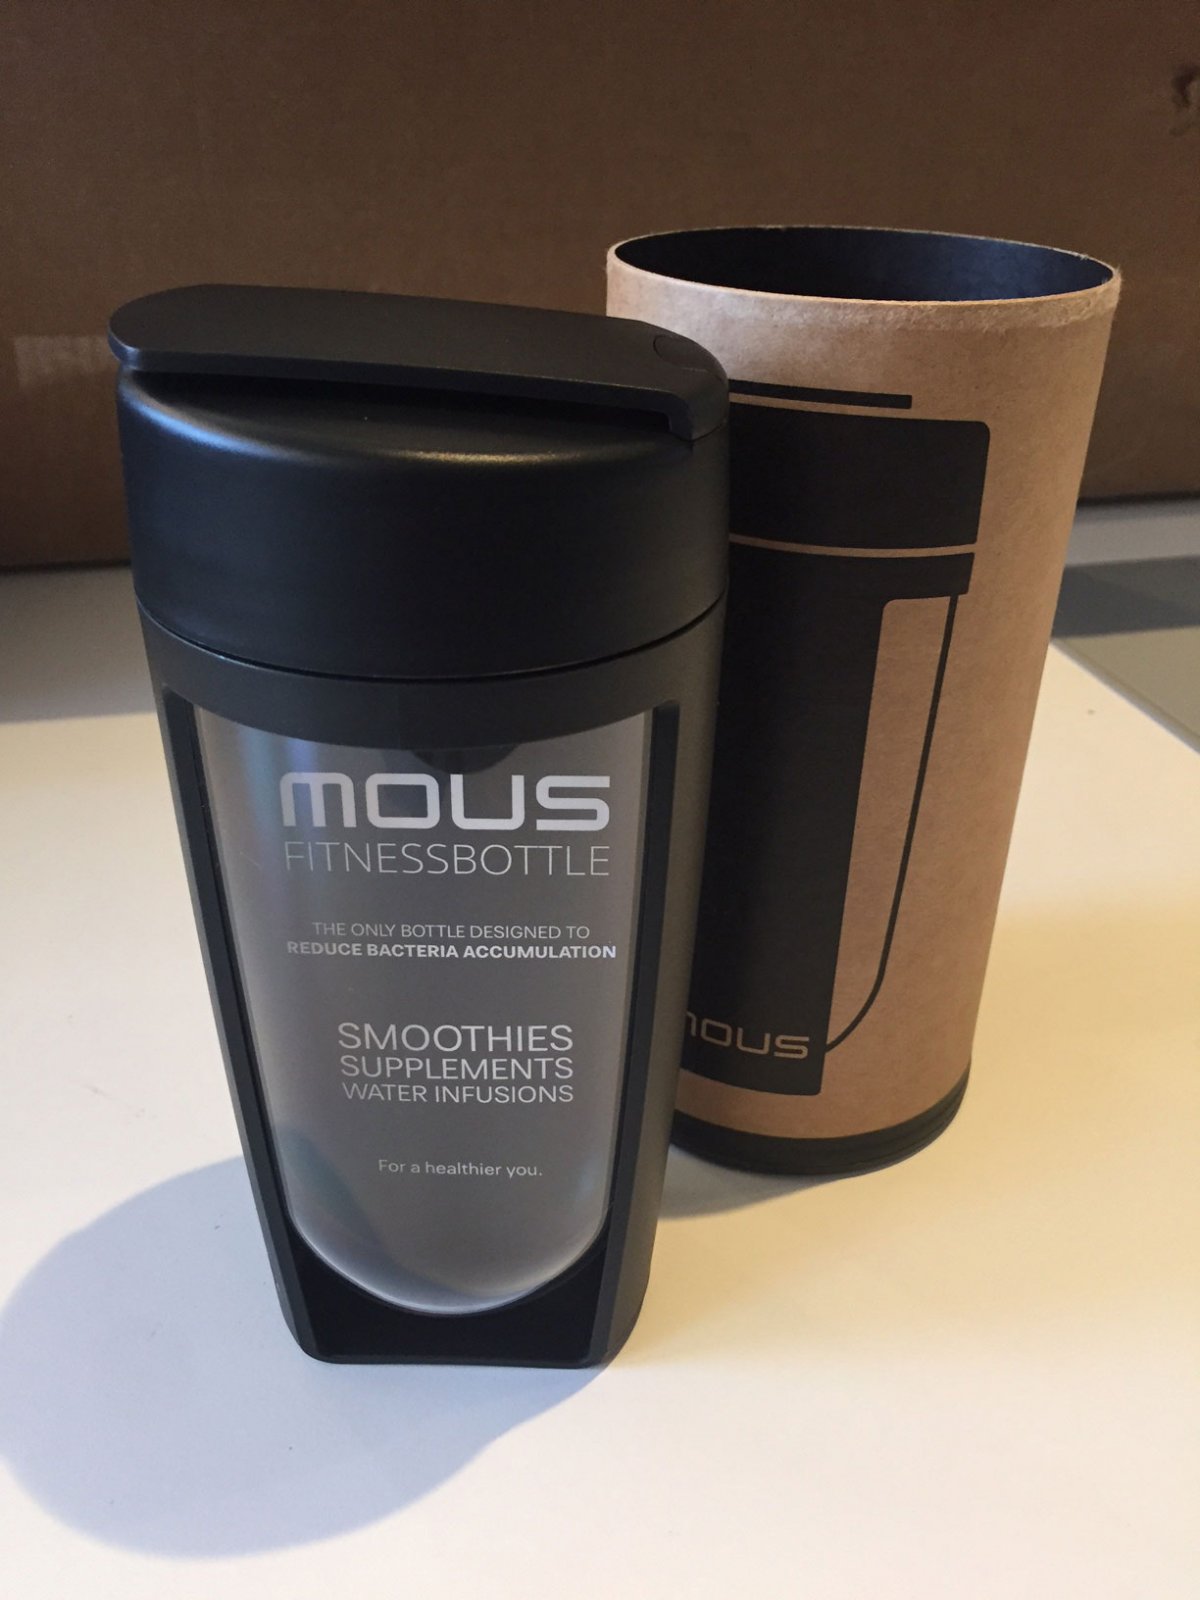 you-get-one-water-bottle-from-mous-which-is-supposed-to-reduce-bacteria-accumulation